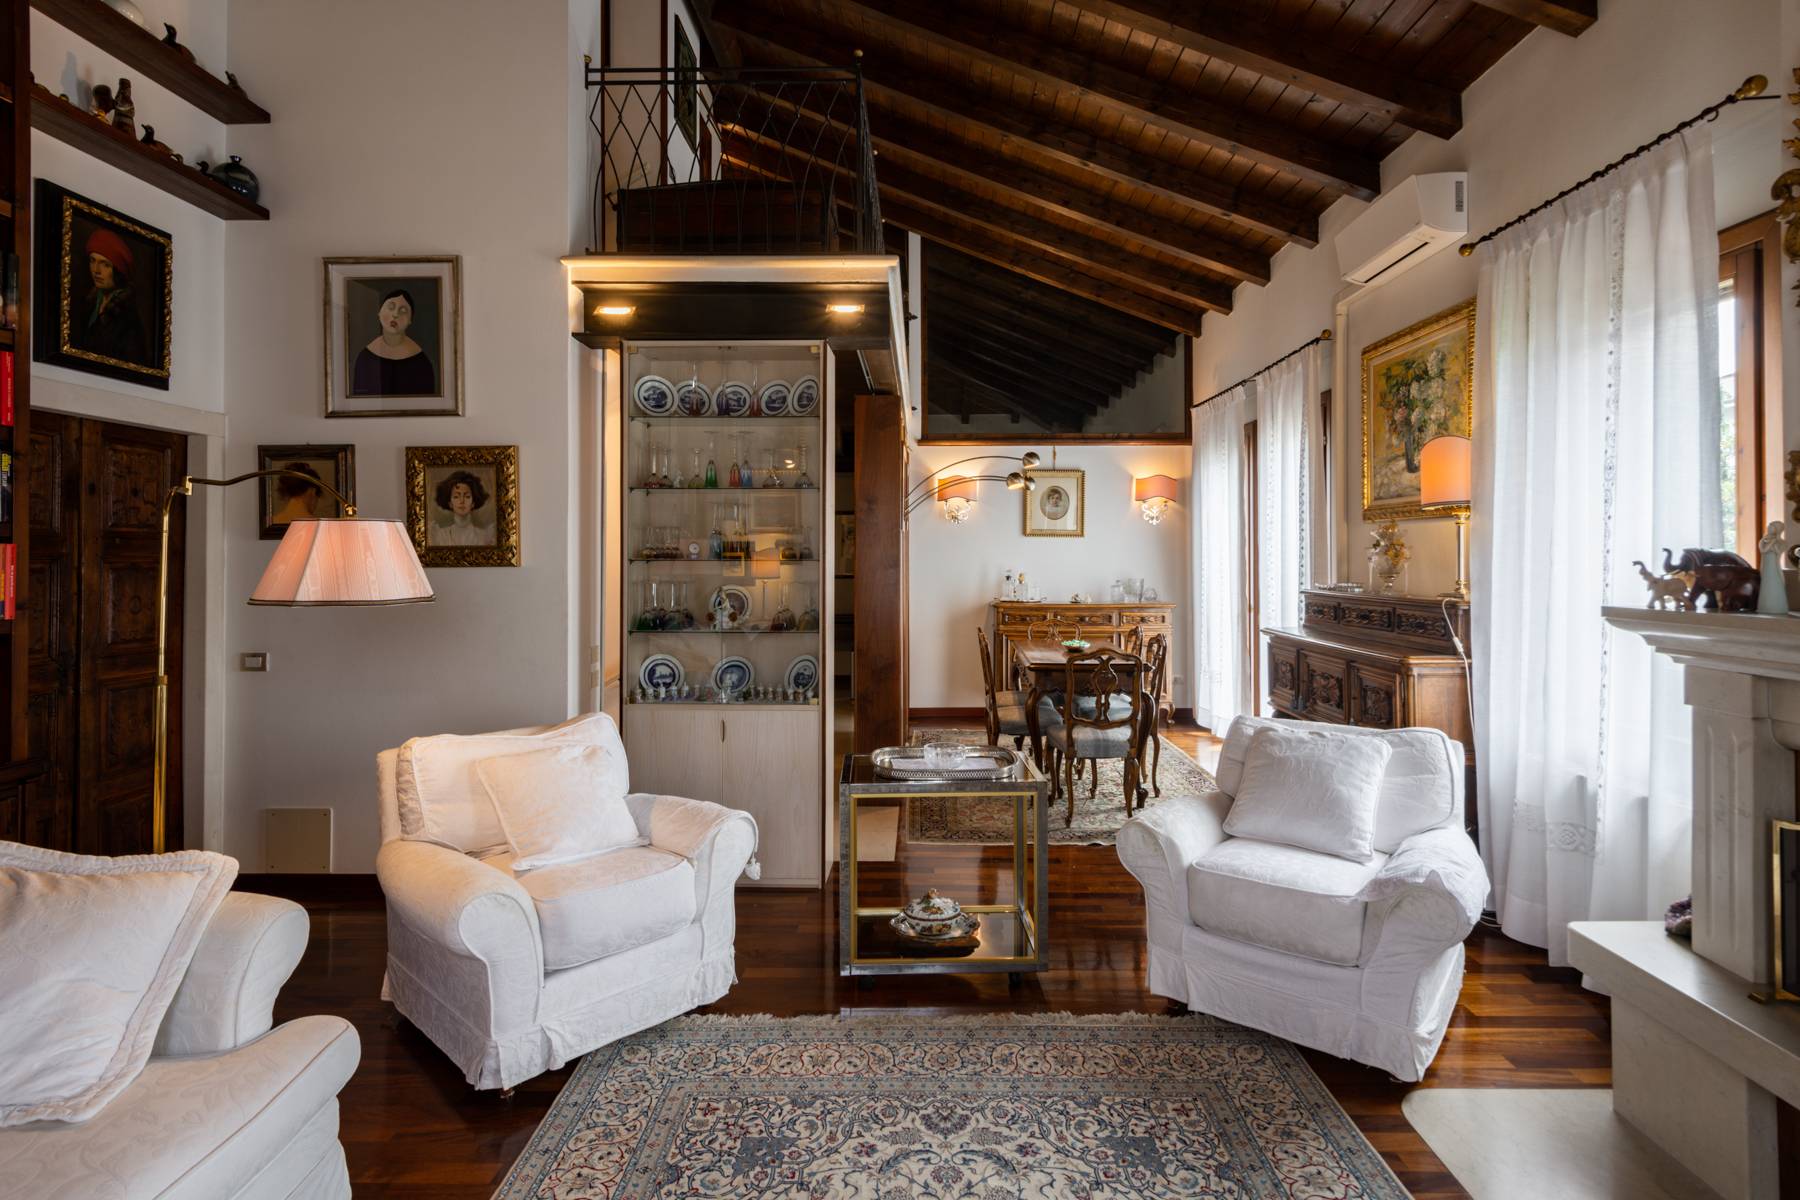 Stunning penthouse in Villa just few minutes from Verona's historic center - 4